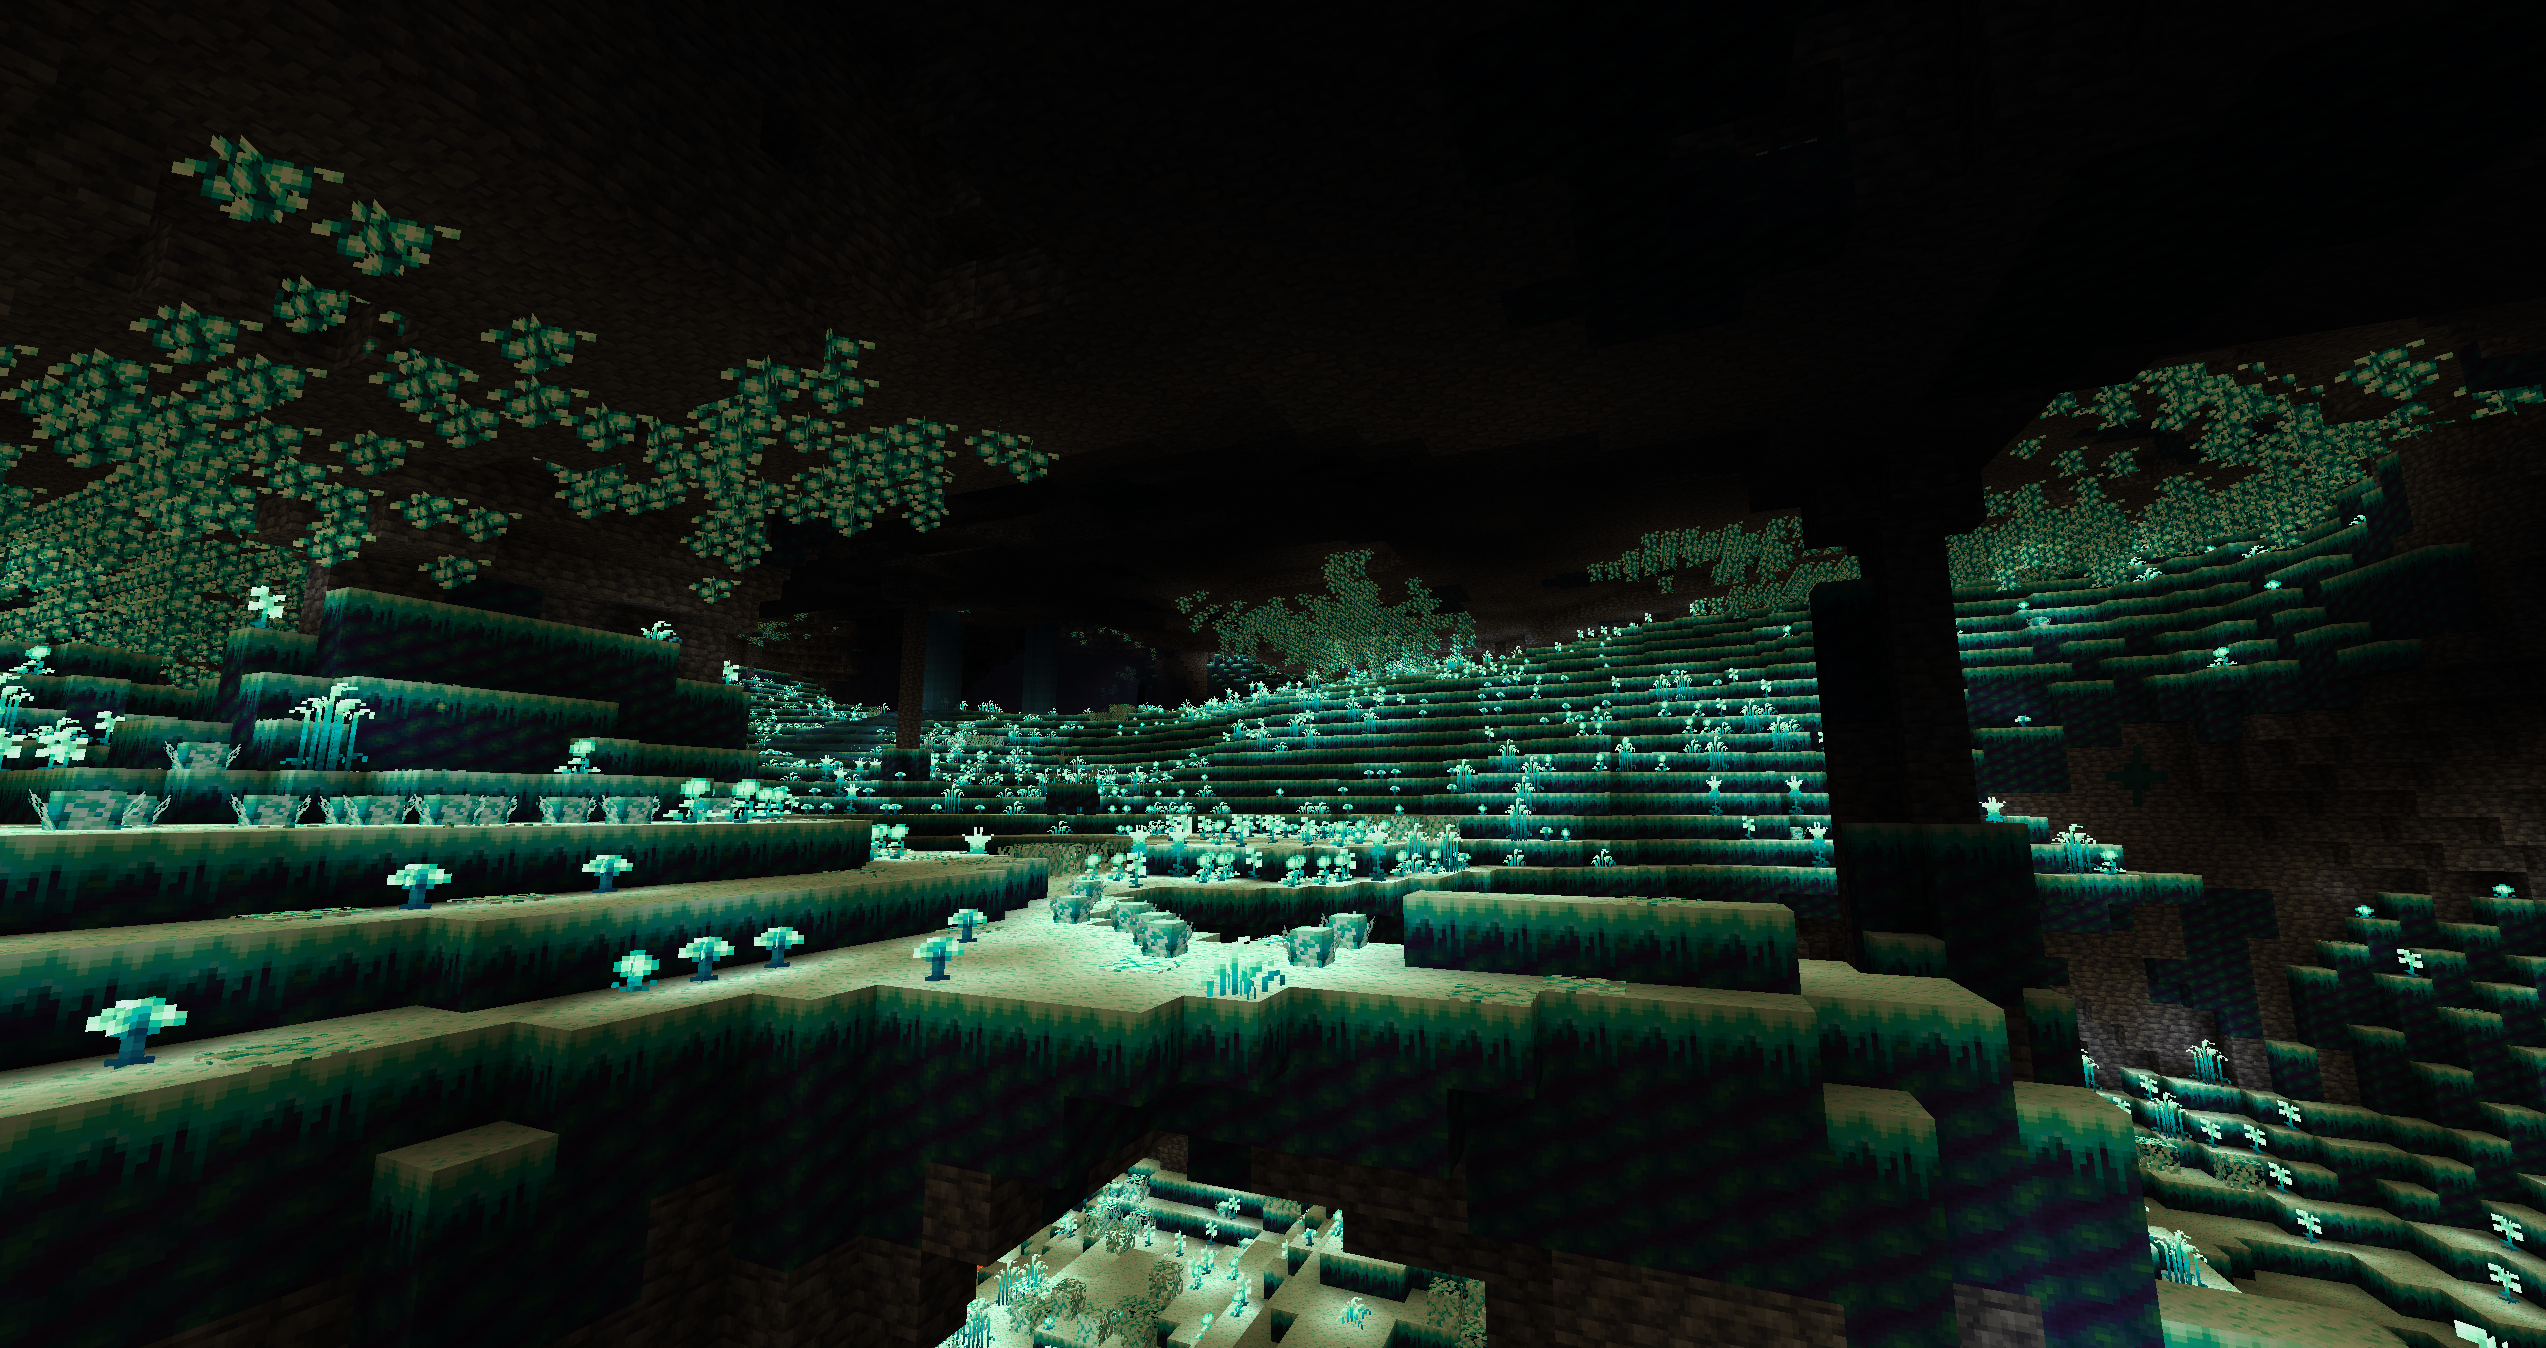 A well-generated Glowroot Cave, botania and all.